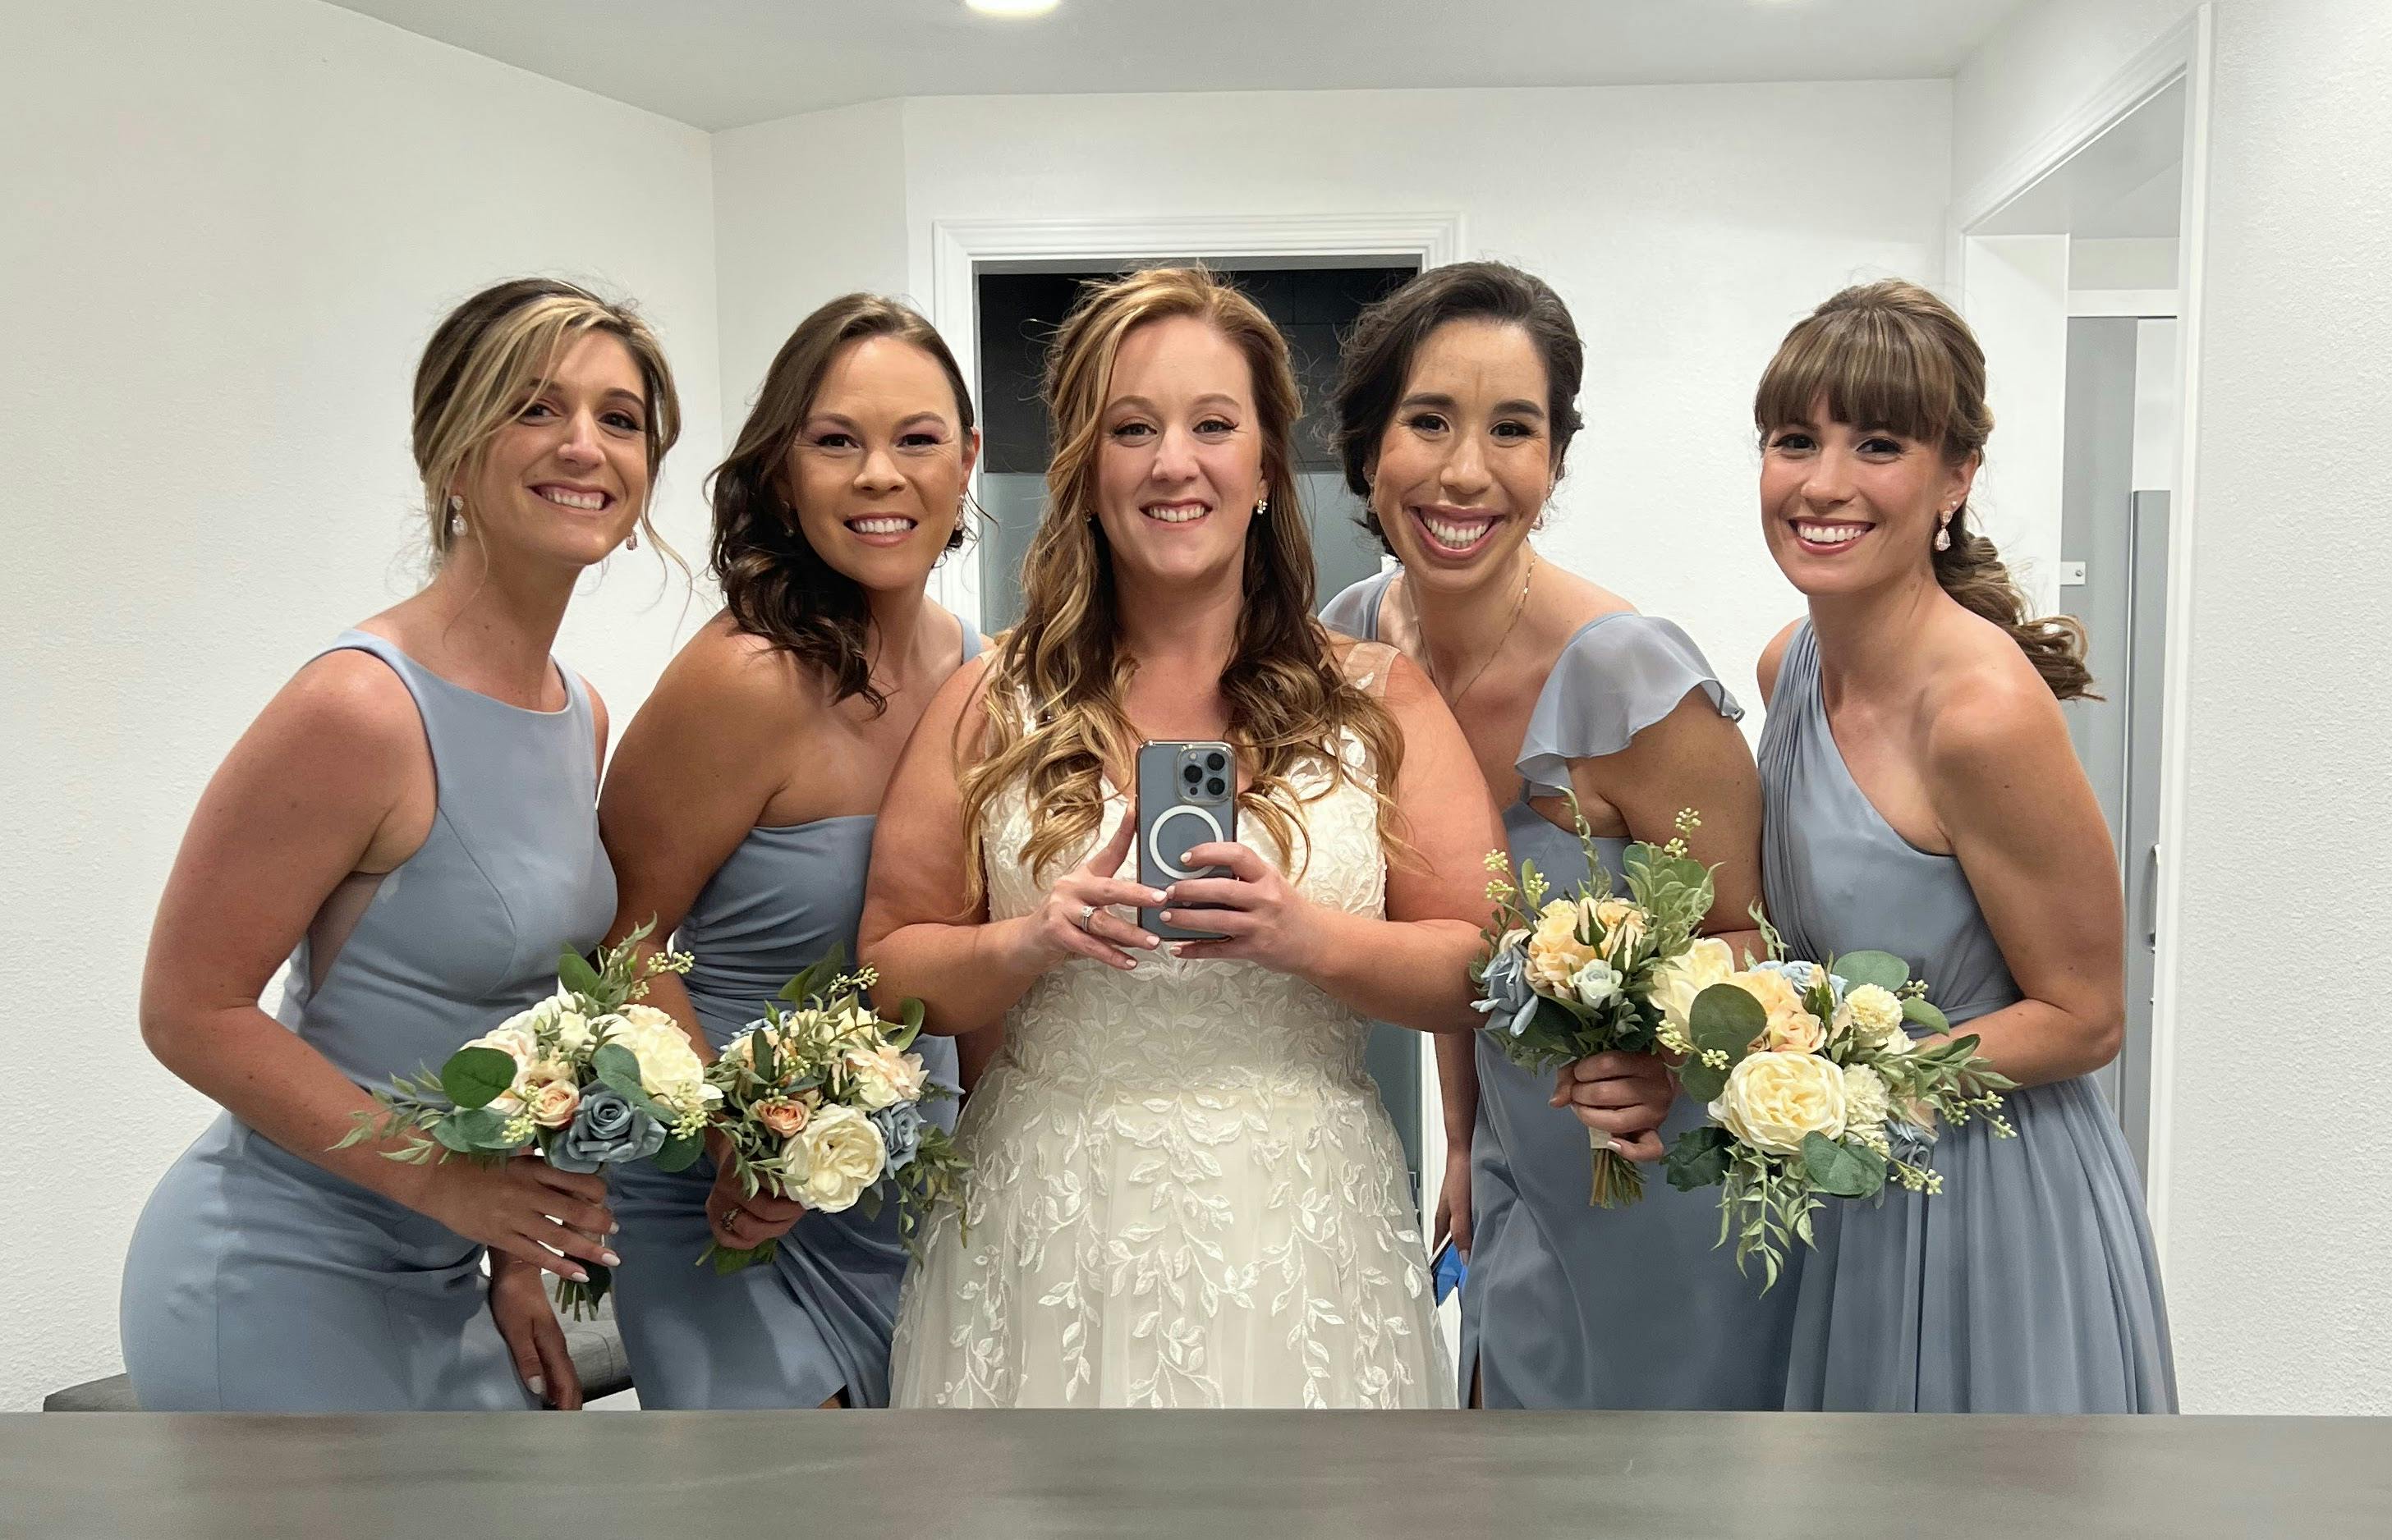 Heather and the bridesmaids in their dresses